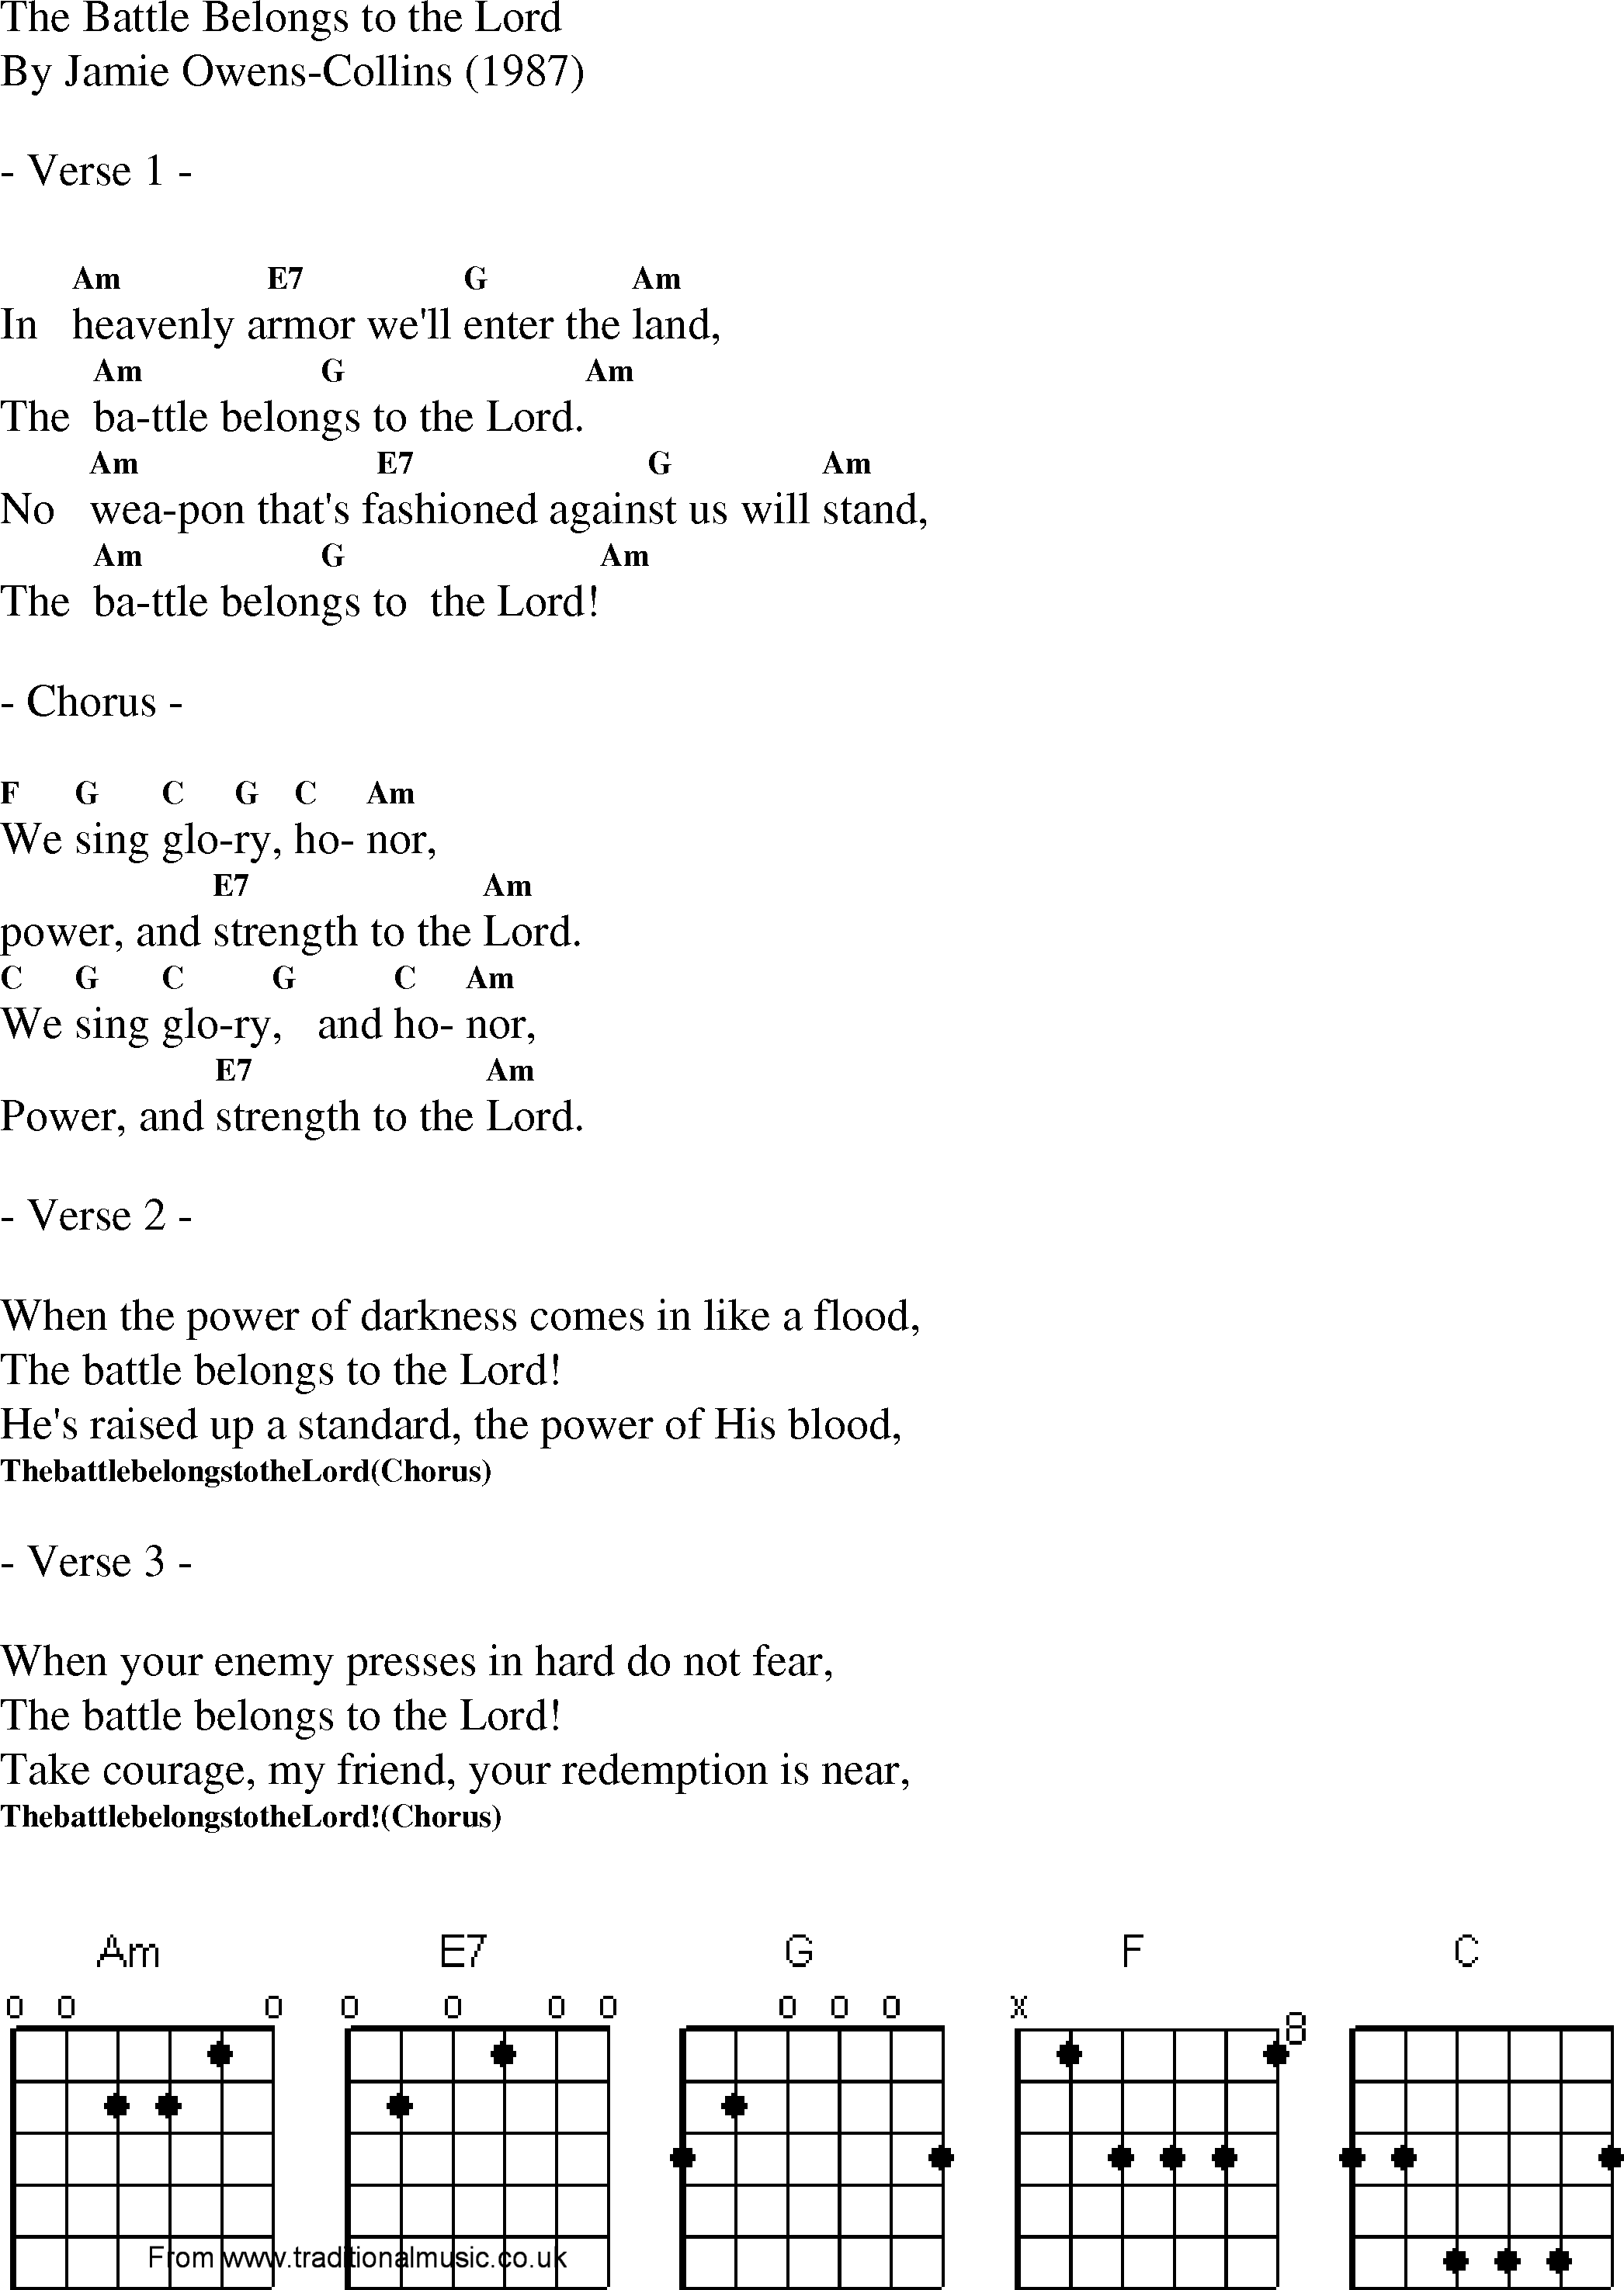 Gospel Song: the_battle_belongs_to_the_lord, lyrics and chords.